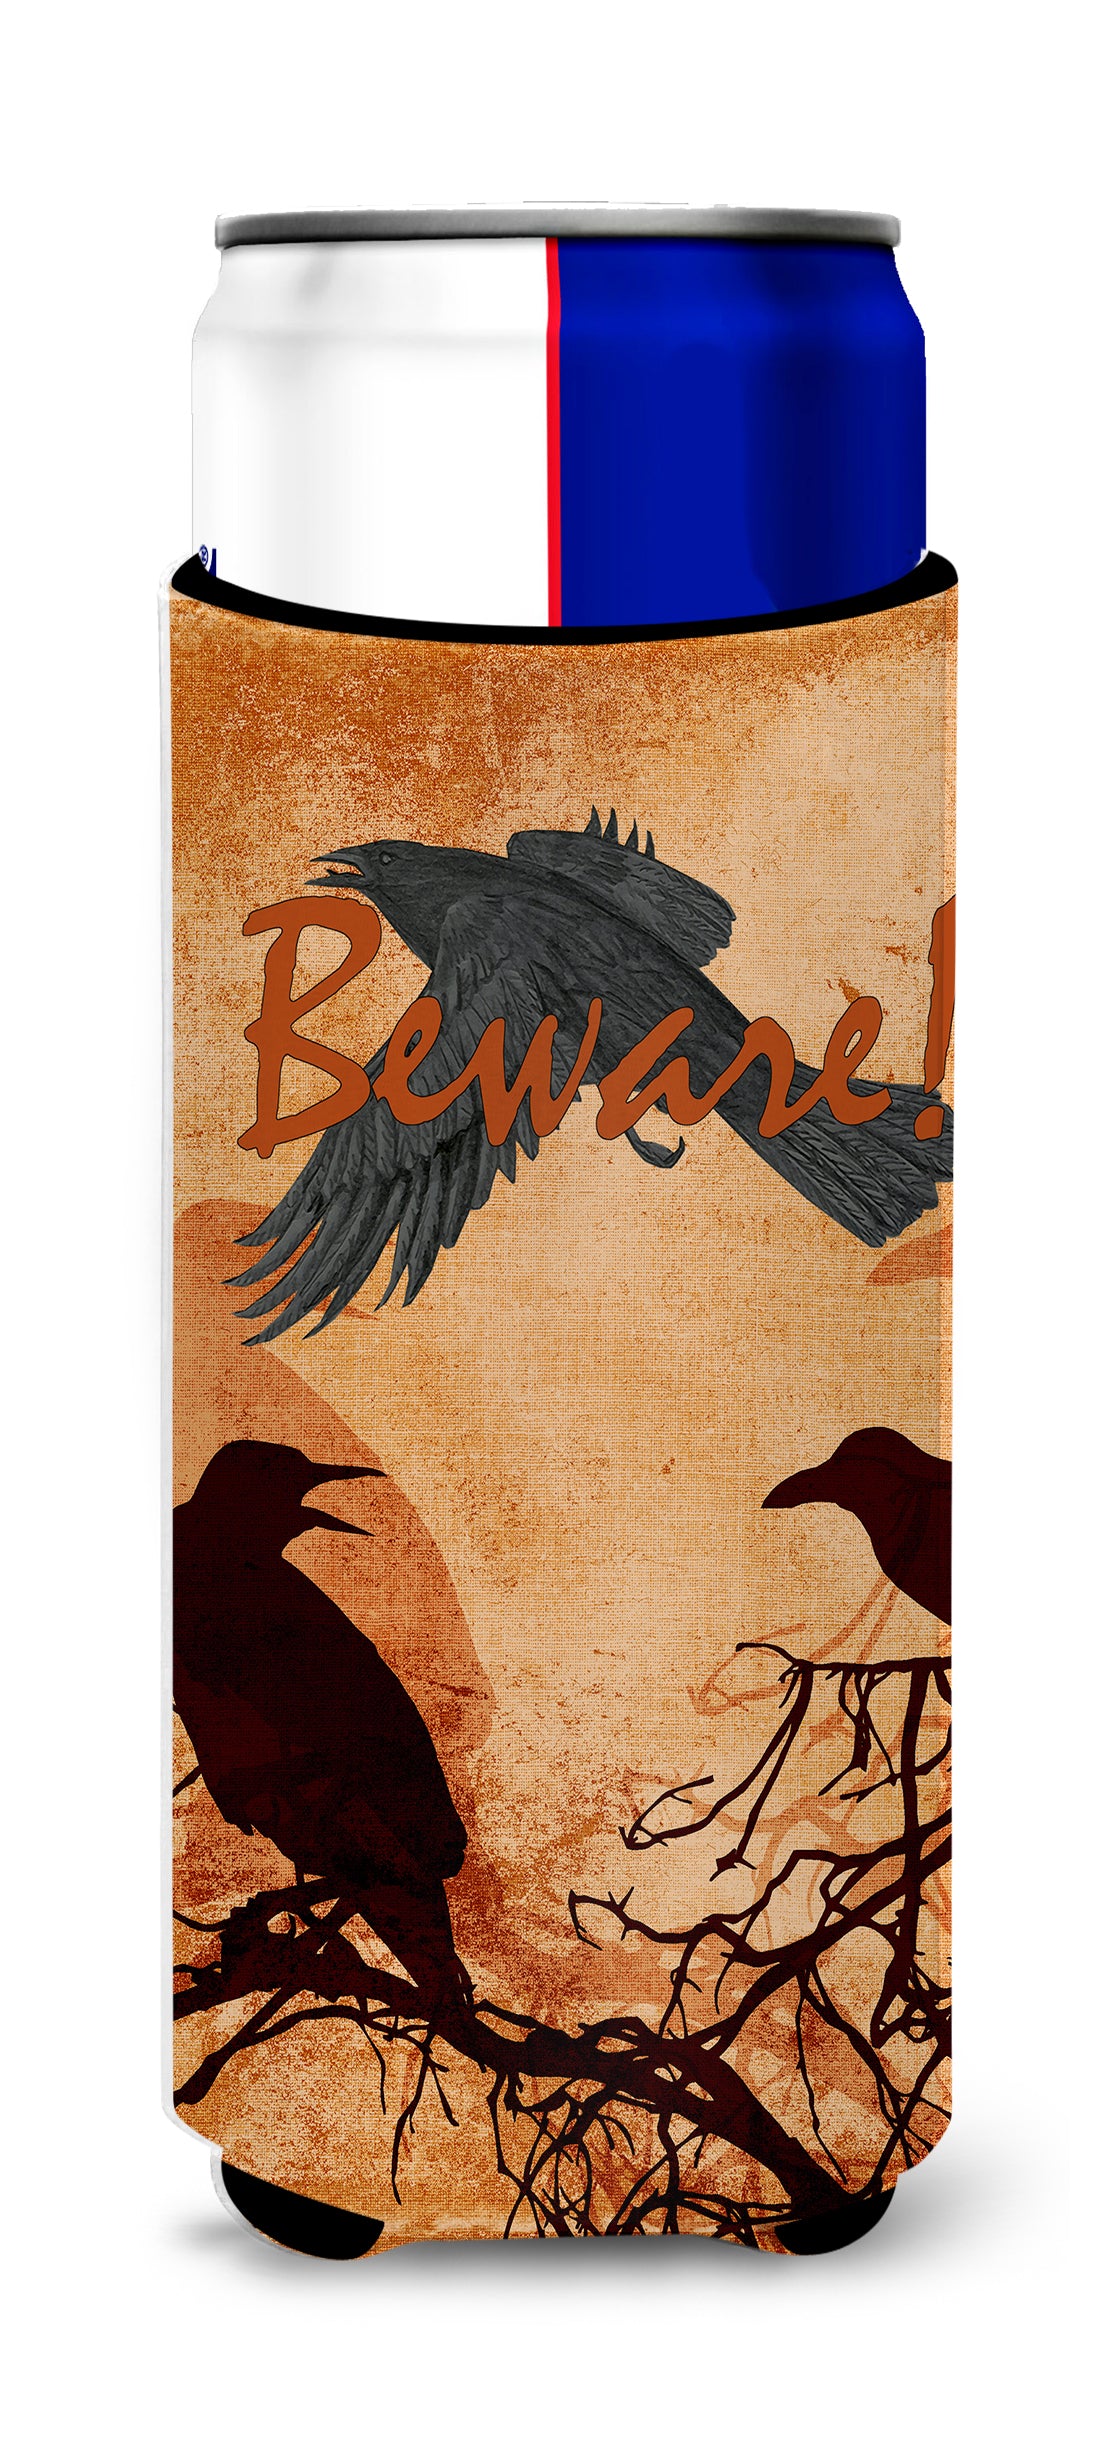 Beware of the Black Crows Halloween Ultra Beverage Insulators for slim cans SB3009MUK